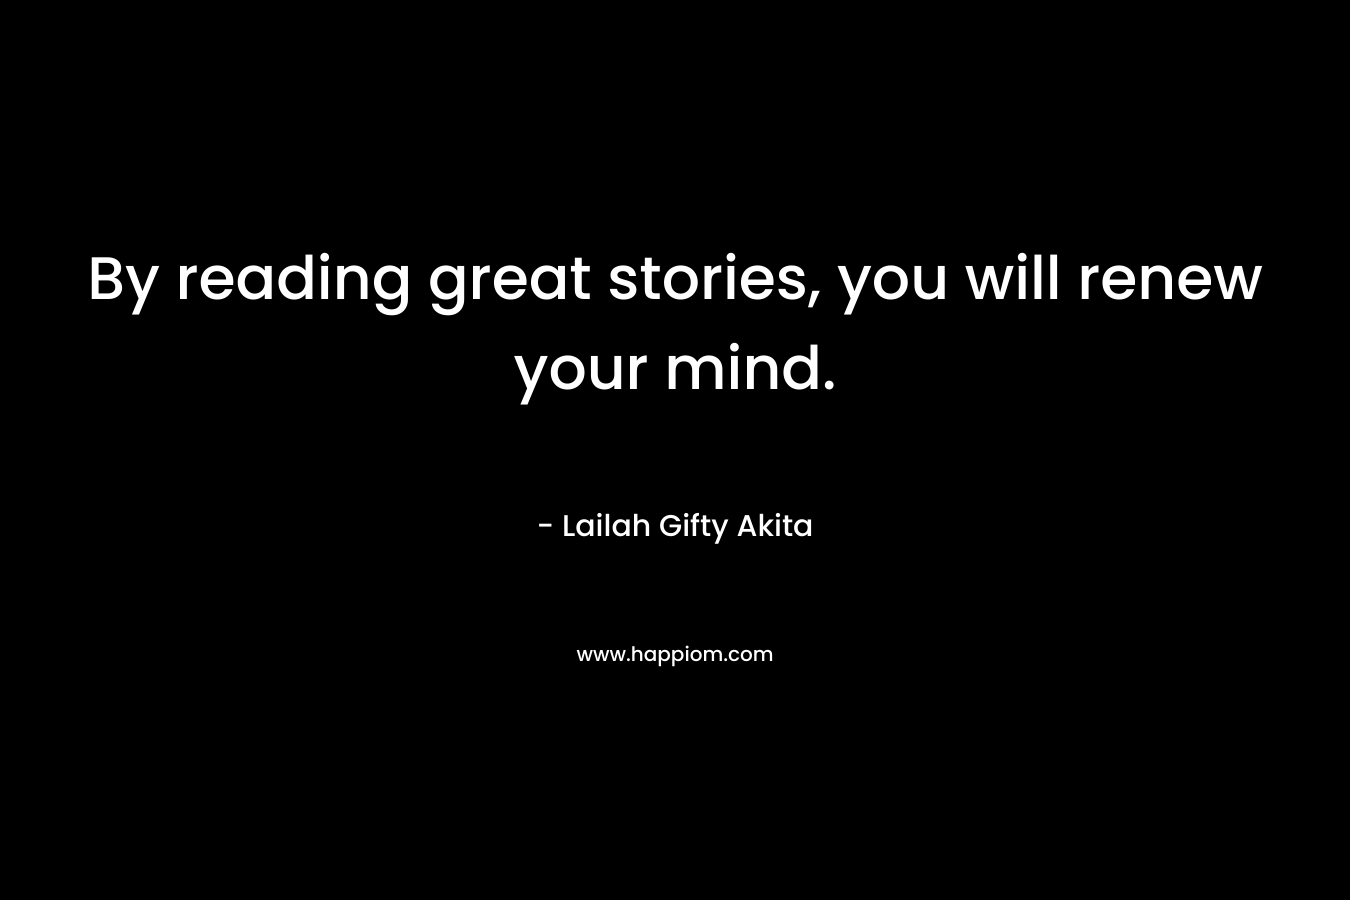 By reading great stories, you will renew your mind.